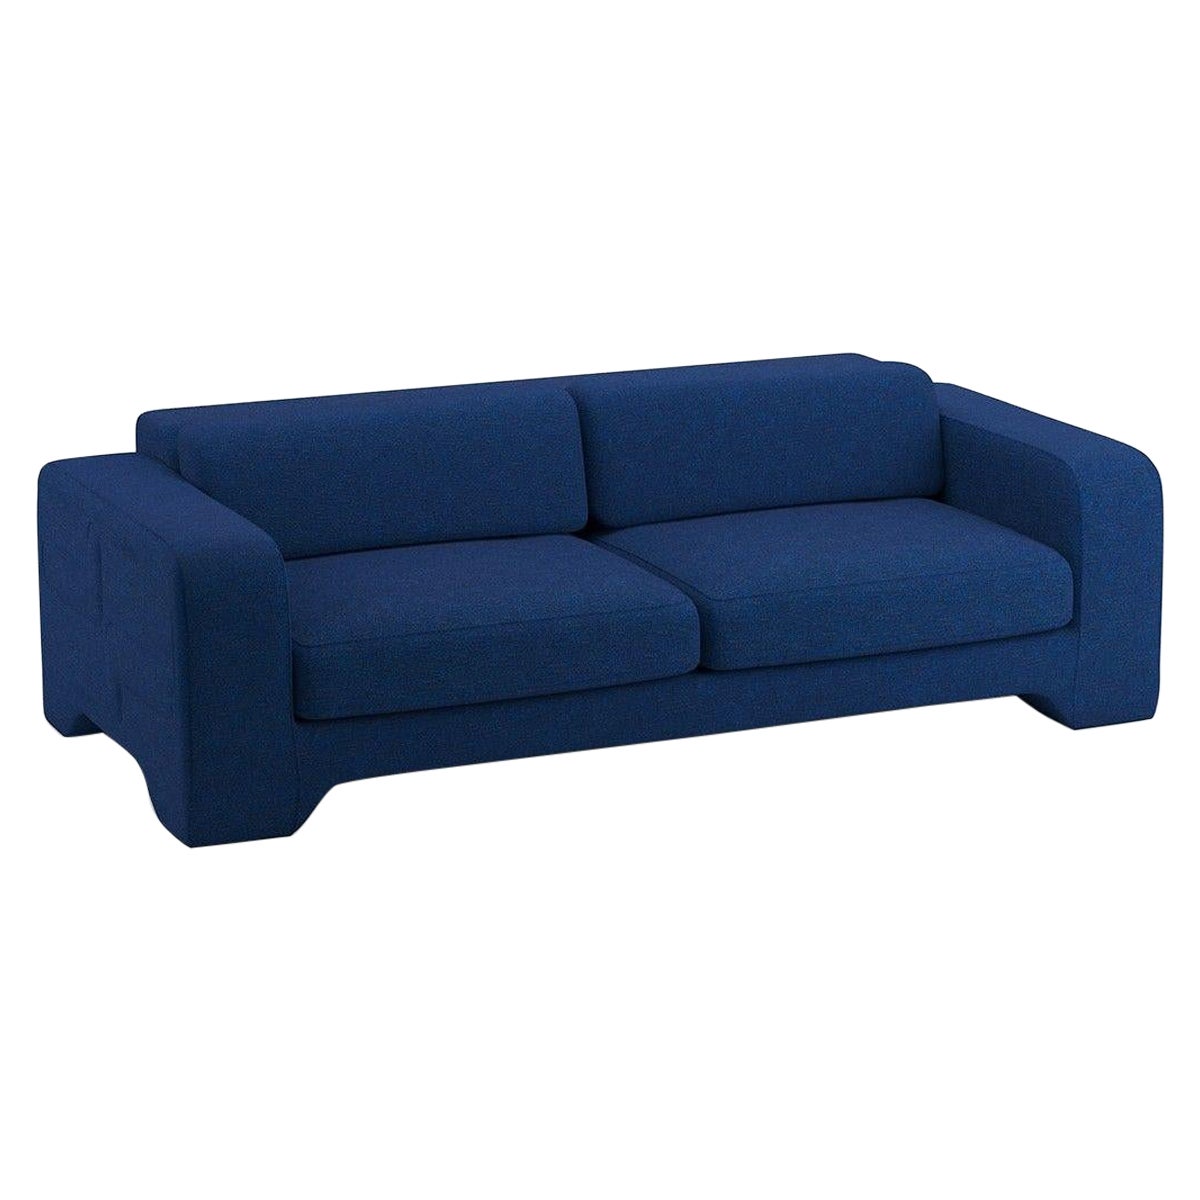 Popus Editions Giovanna 3 Seater Sofa in Ocean Megeve Fabric with Knit Effect For Sale